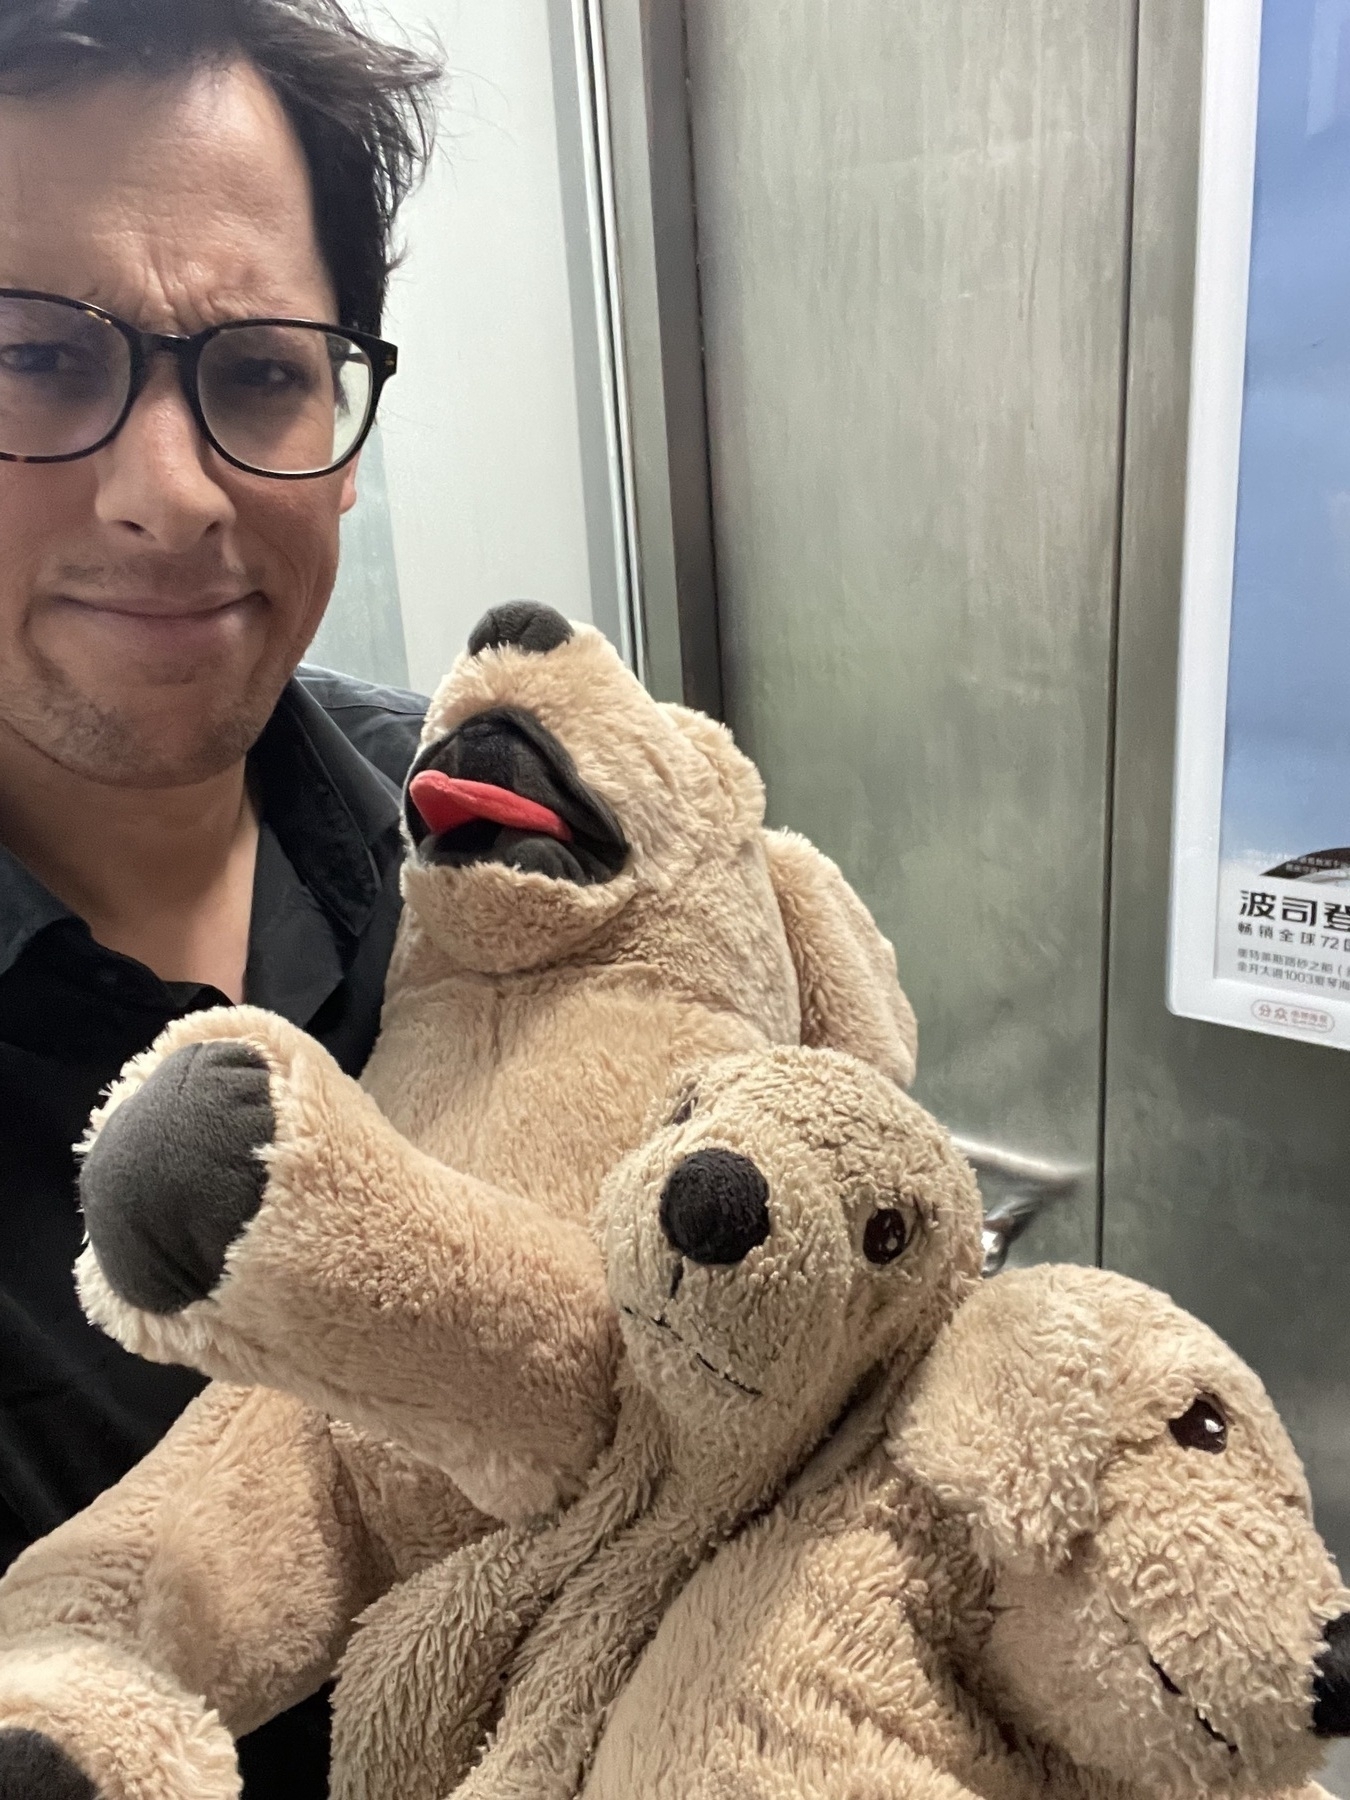 exasperated man holding 3 toy dogs